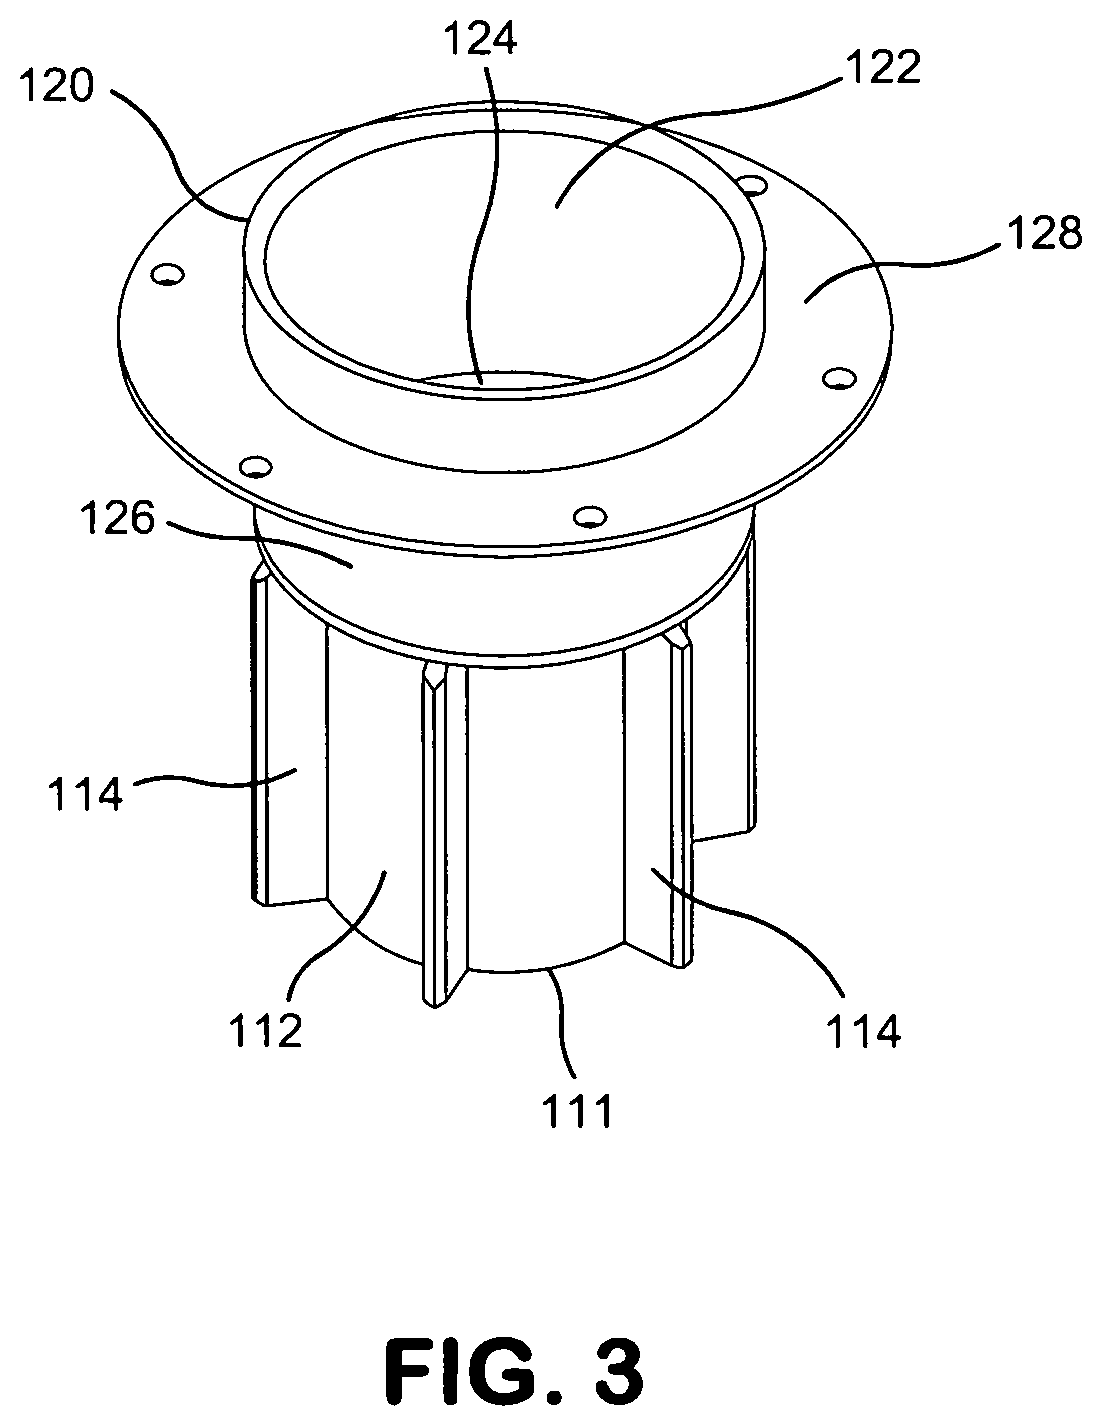 Cup holder table mount apparatus, and the like